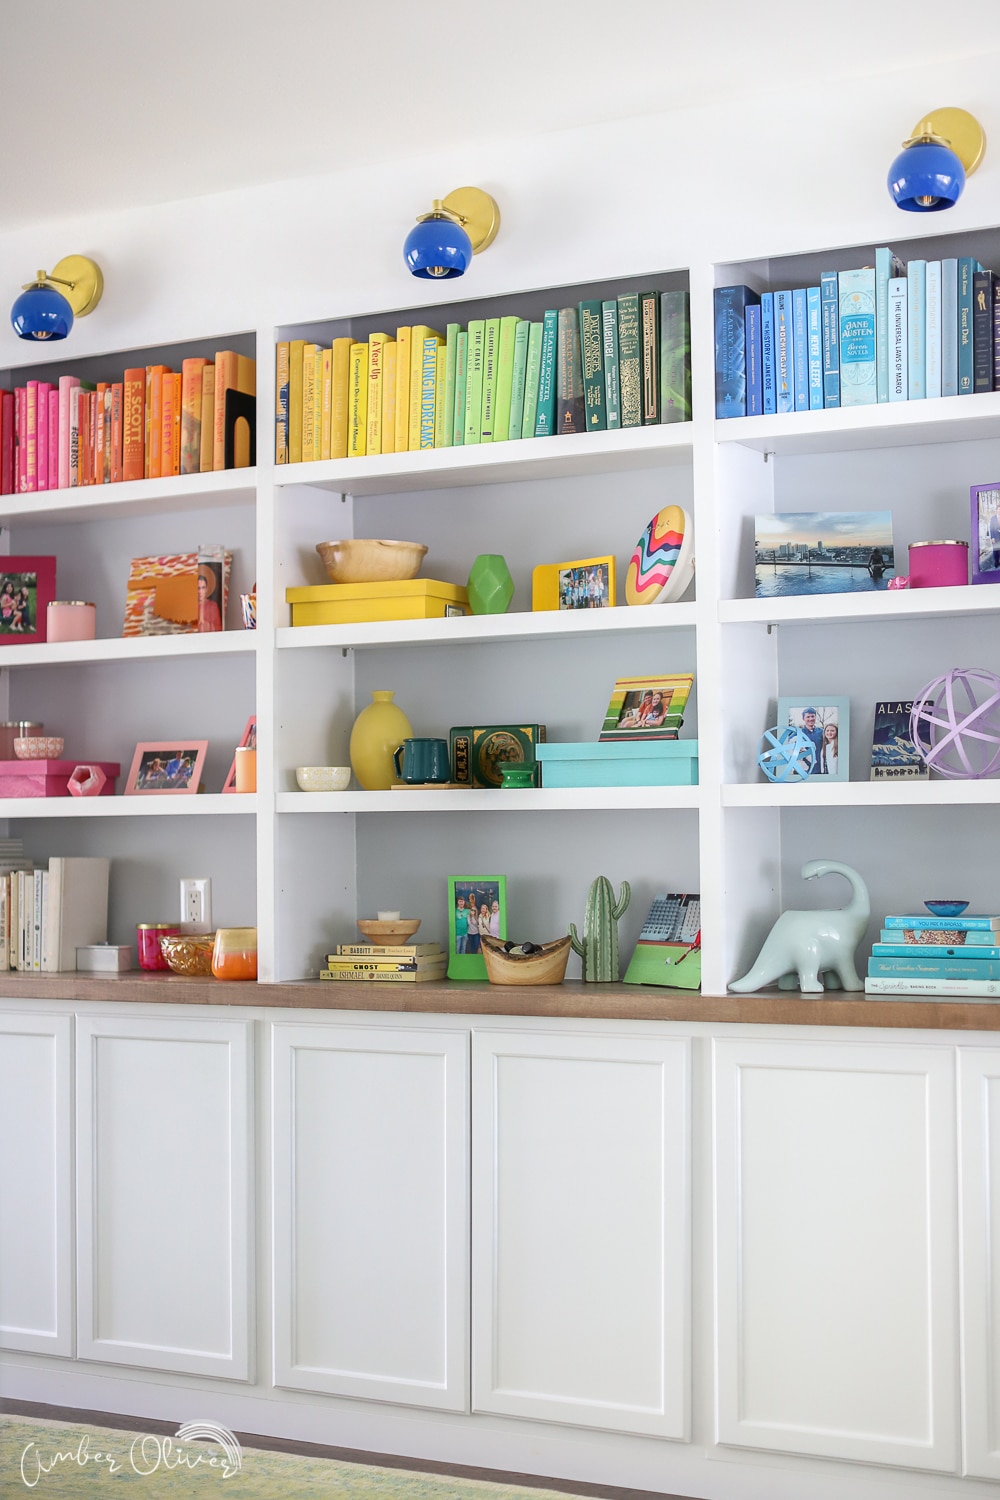 Rainbow DIY Bookshelf with Built in Cabinets - Amber Oliver